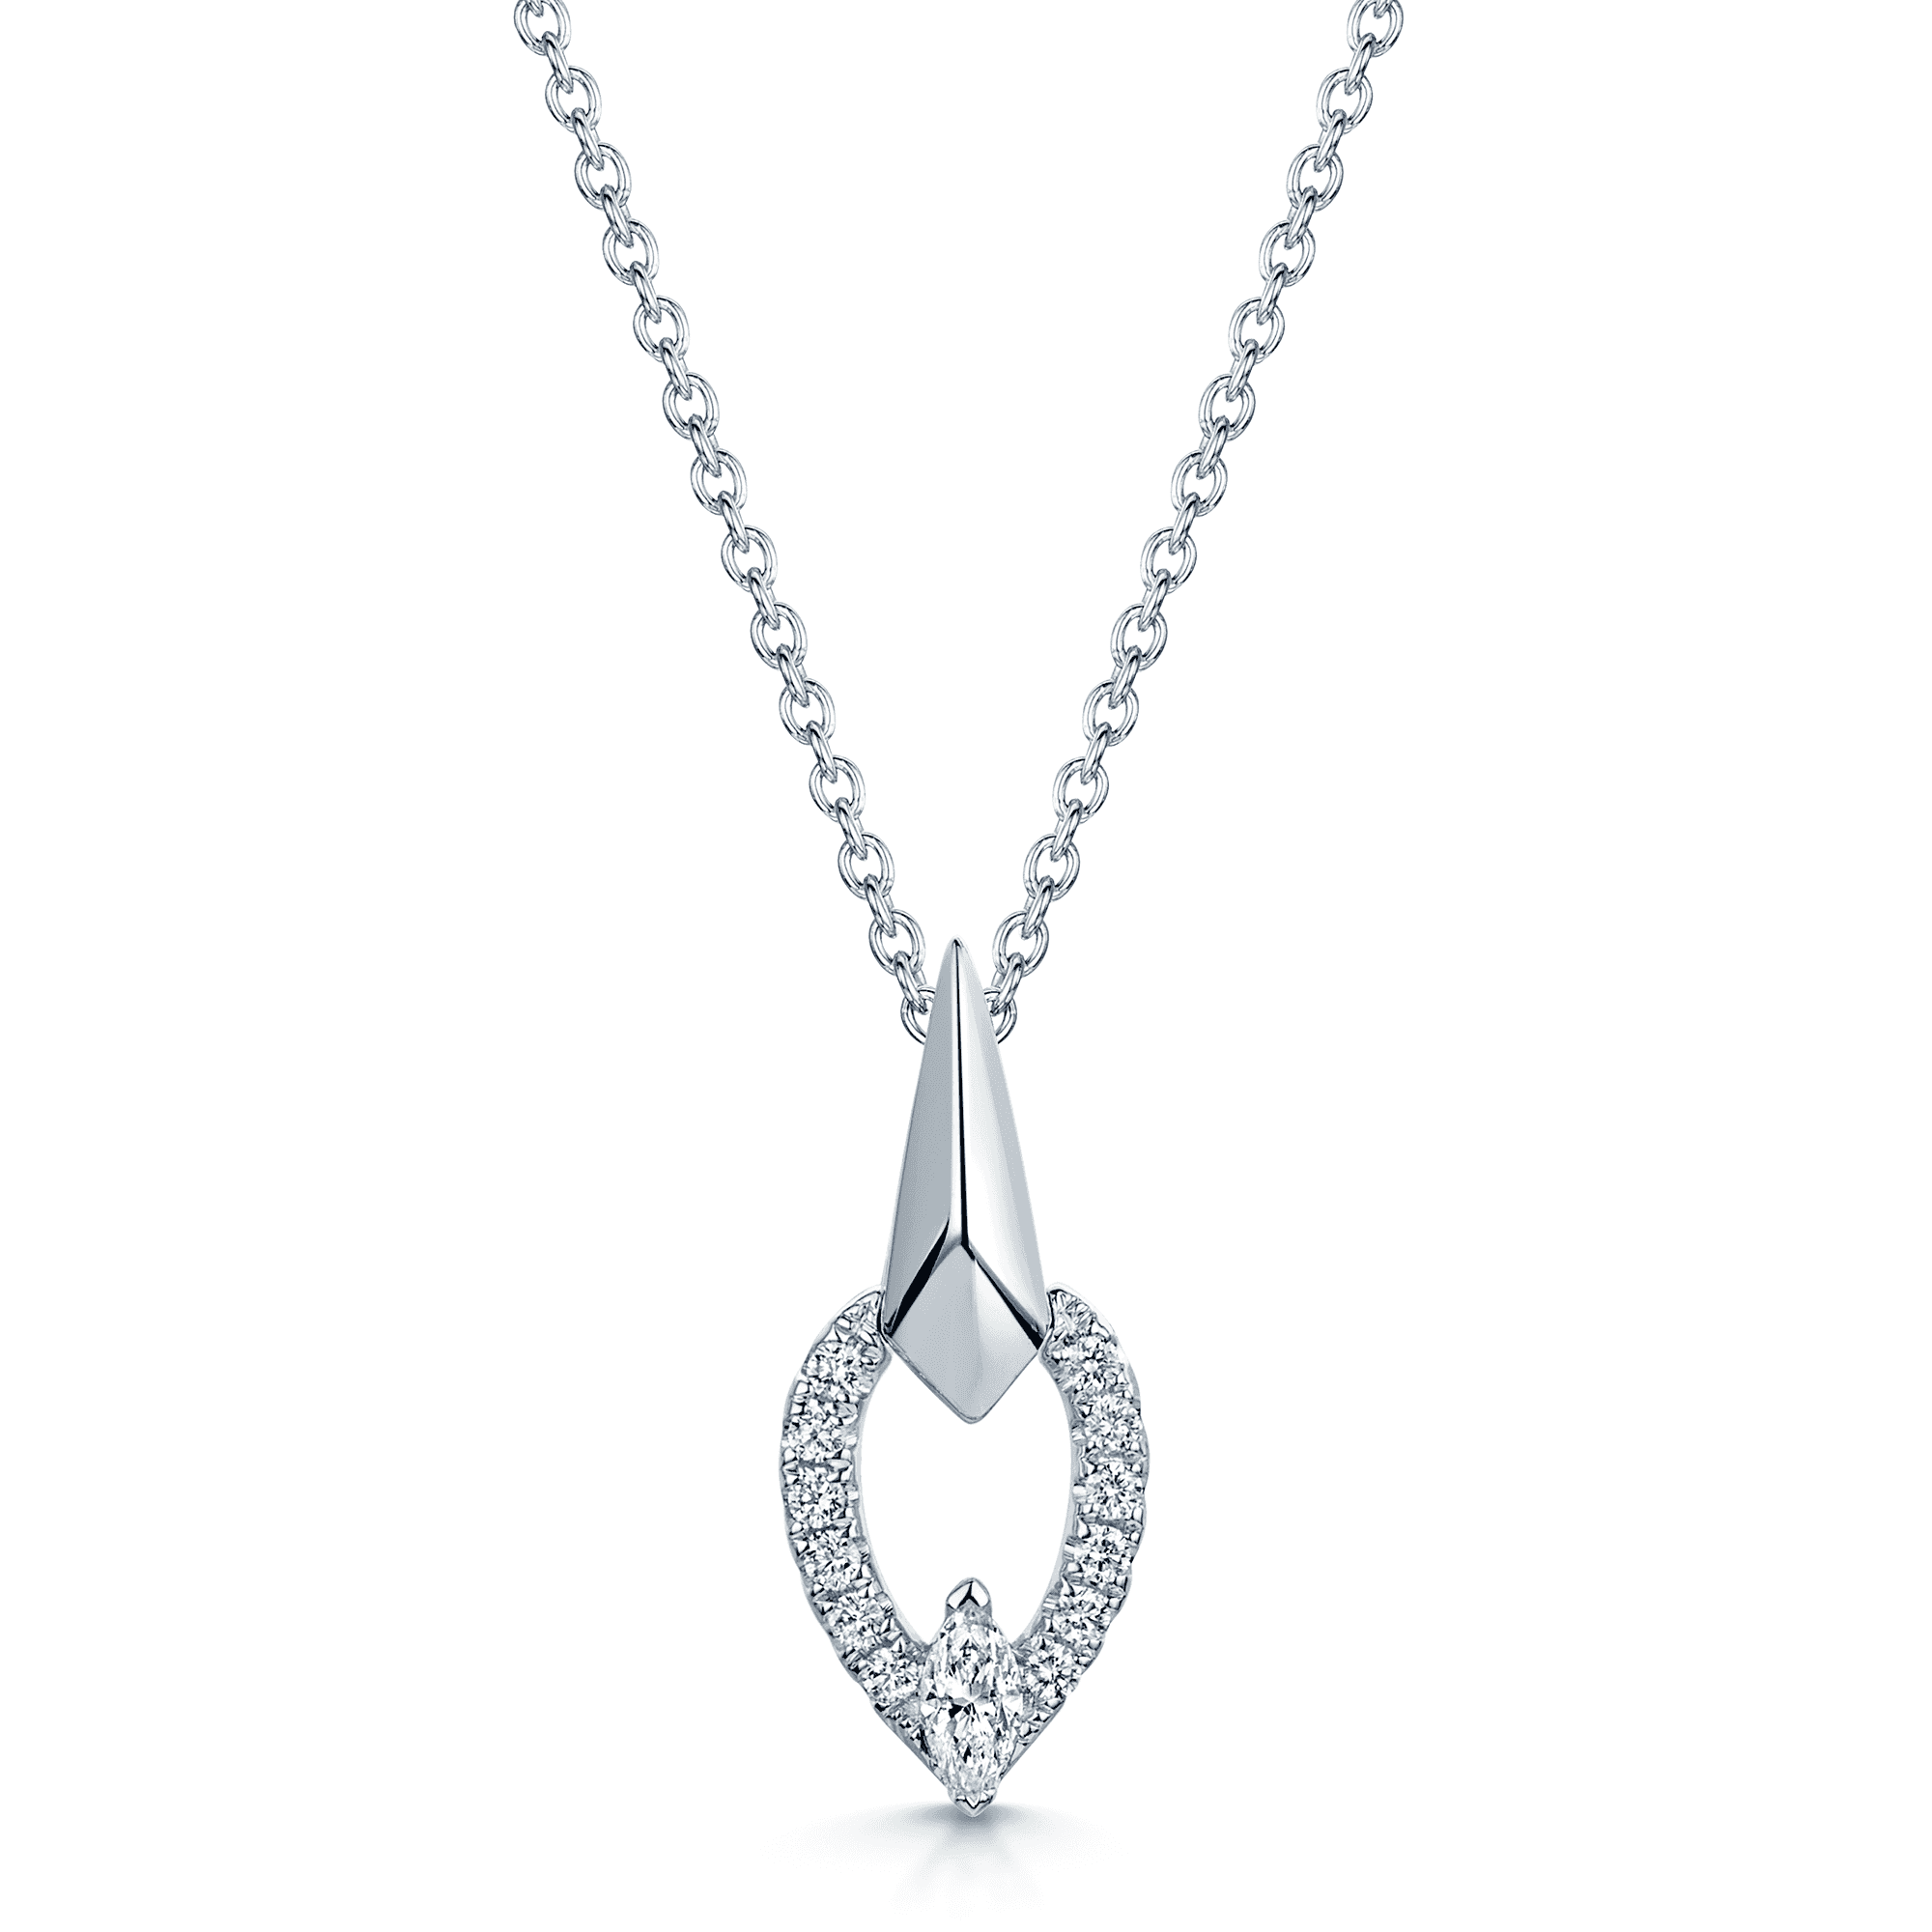 The Origin Collection 18ct White Gold Marquise Diamond Faceted Teardrop Necklace